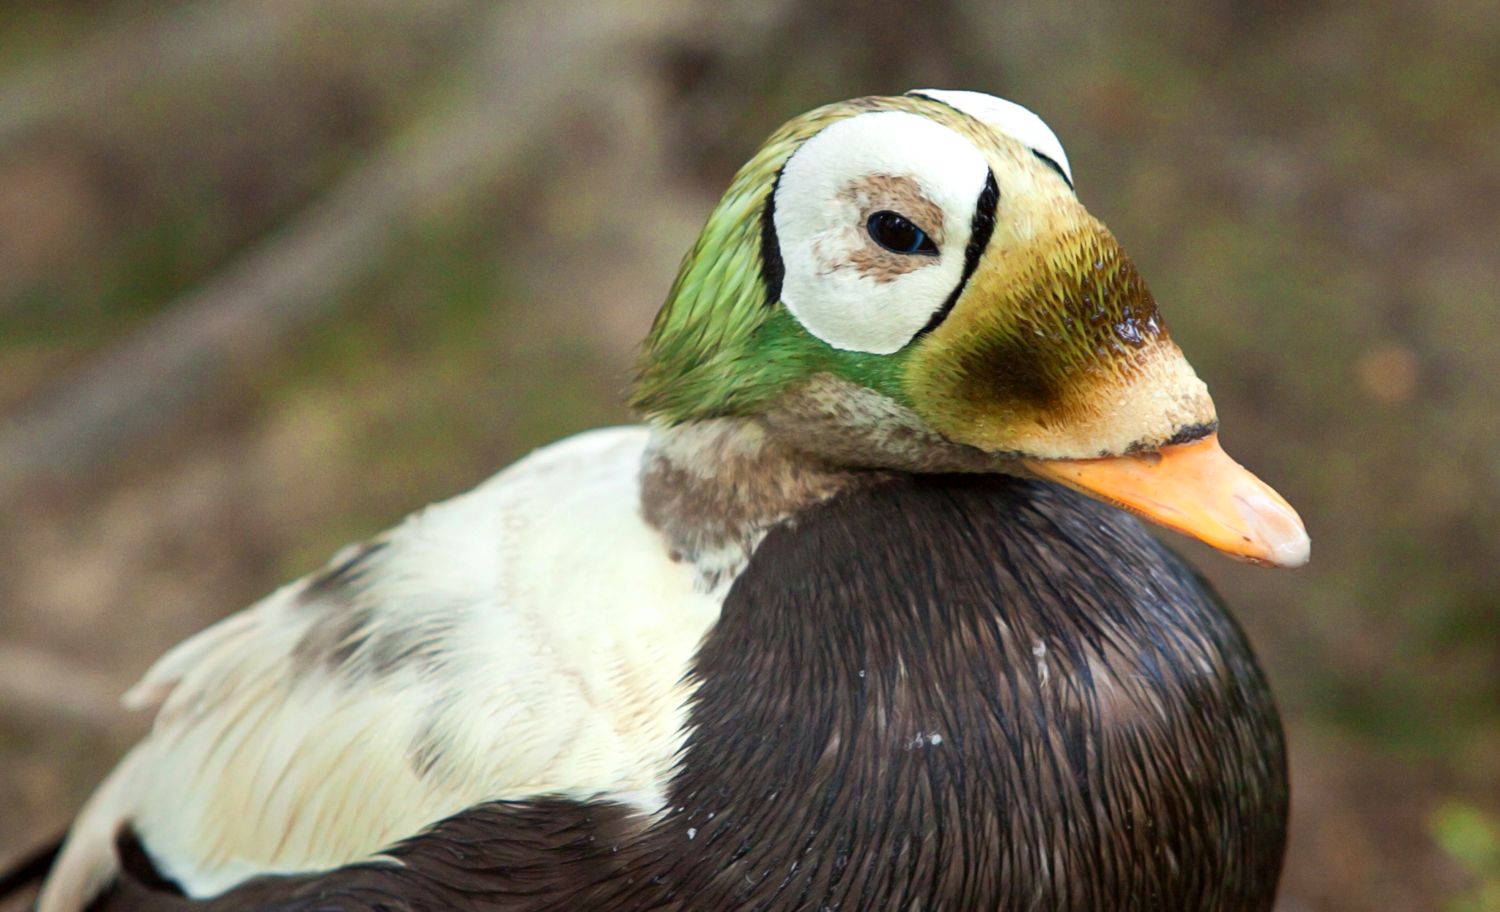 Closeup of a spectacled eider with a black outline around its eyes.